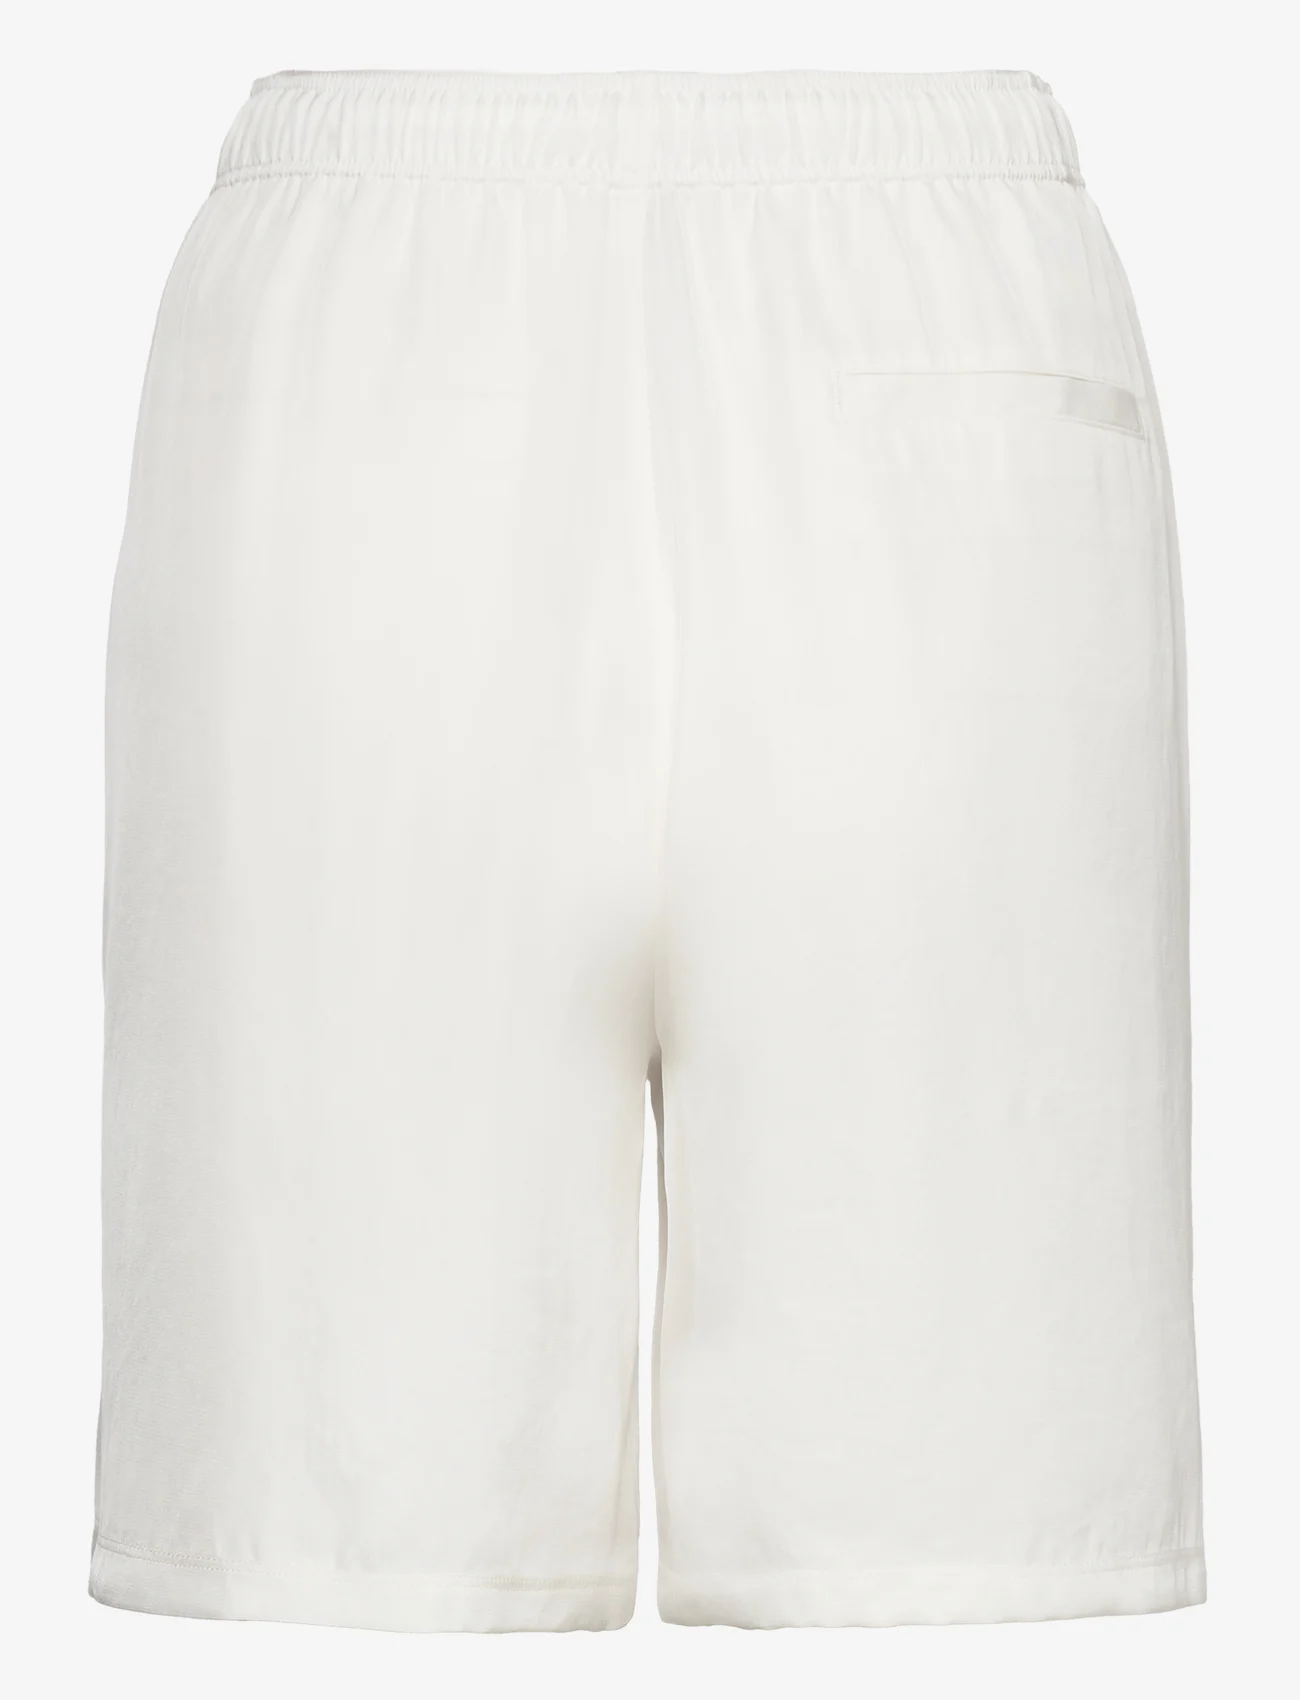 Filippa K - Twill Piped Short - casual szorty - white chal - 1